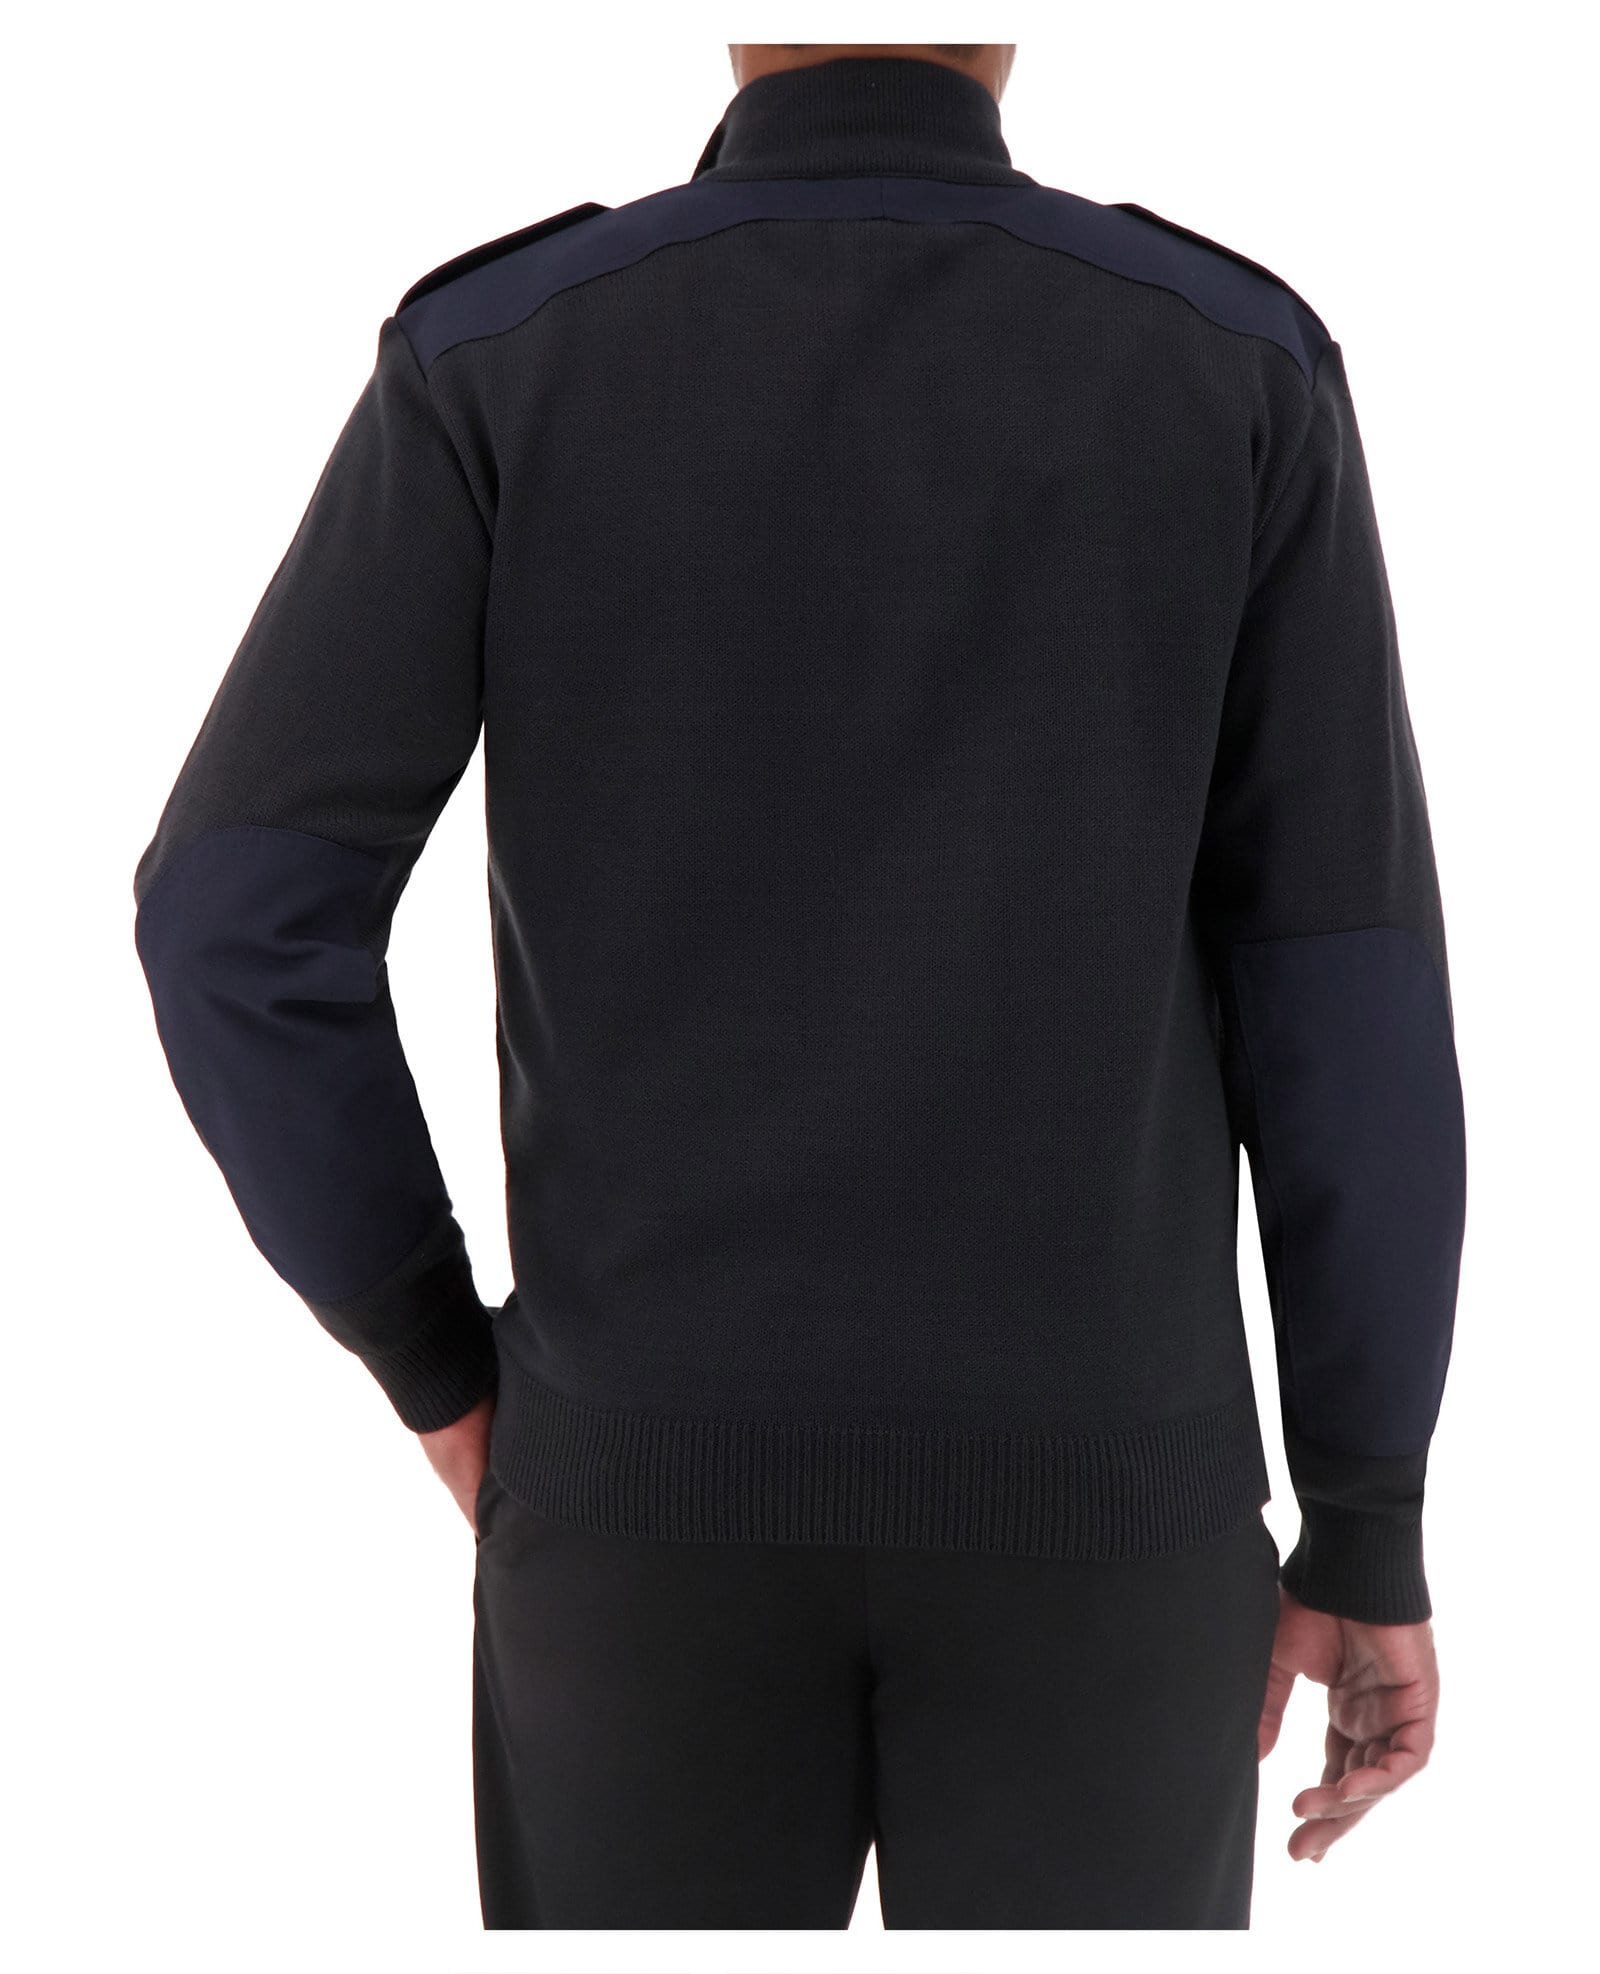 back of navy quarter zip mock neck sweater with shoulder patches 